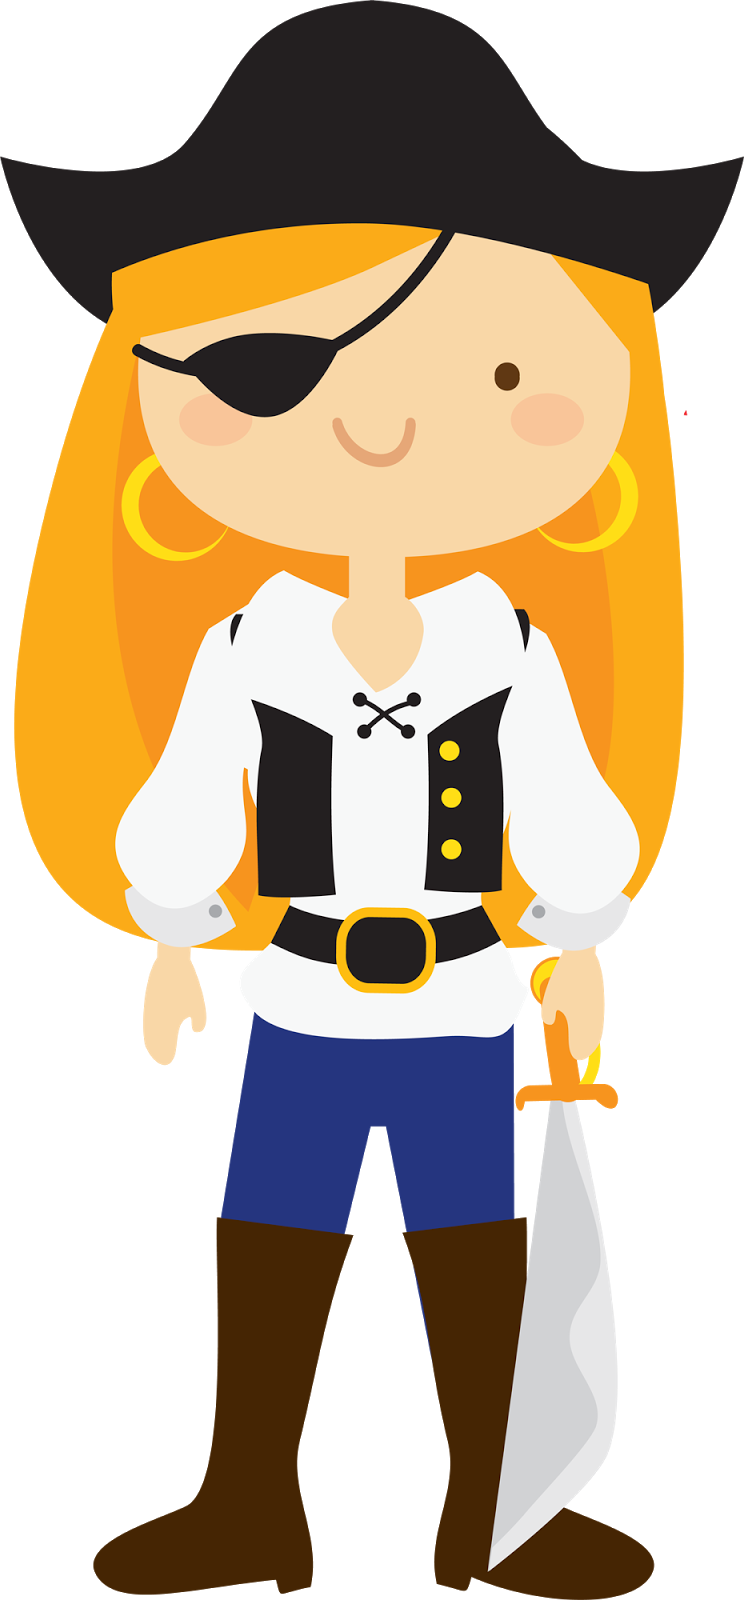 Queen teaching treasures back. Young clipart pirate